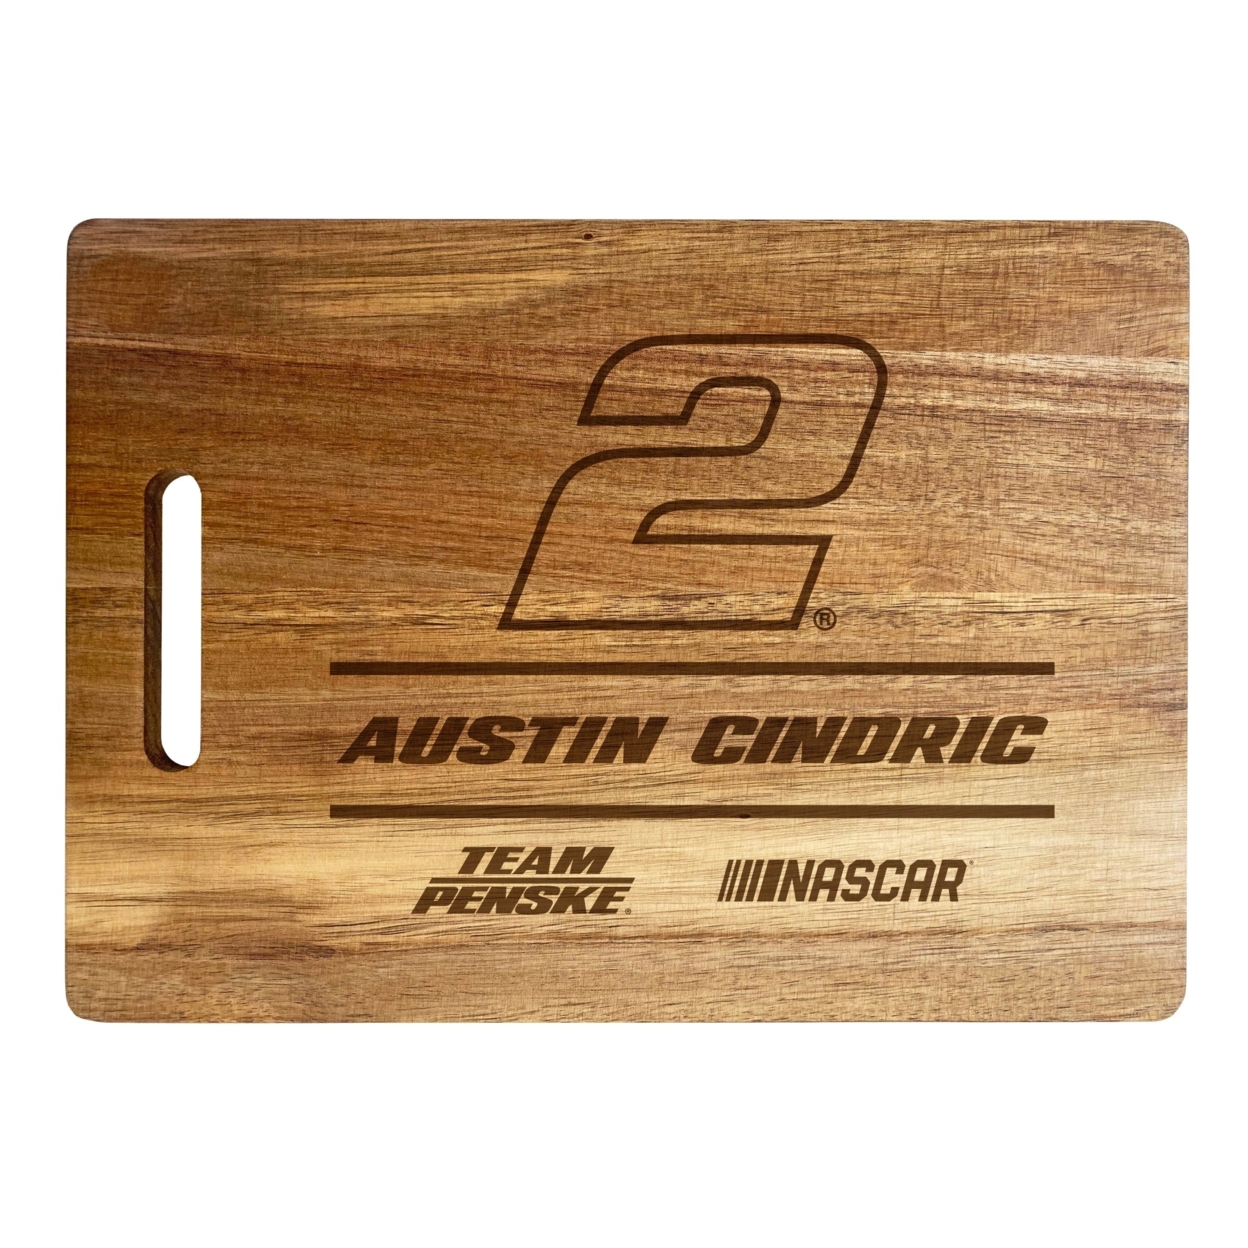 #2 Austin Cindric NASCAR Officially Licensed Engraved Wooden Cutting Board